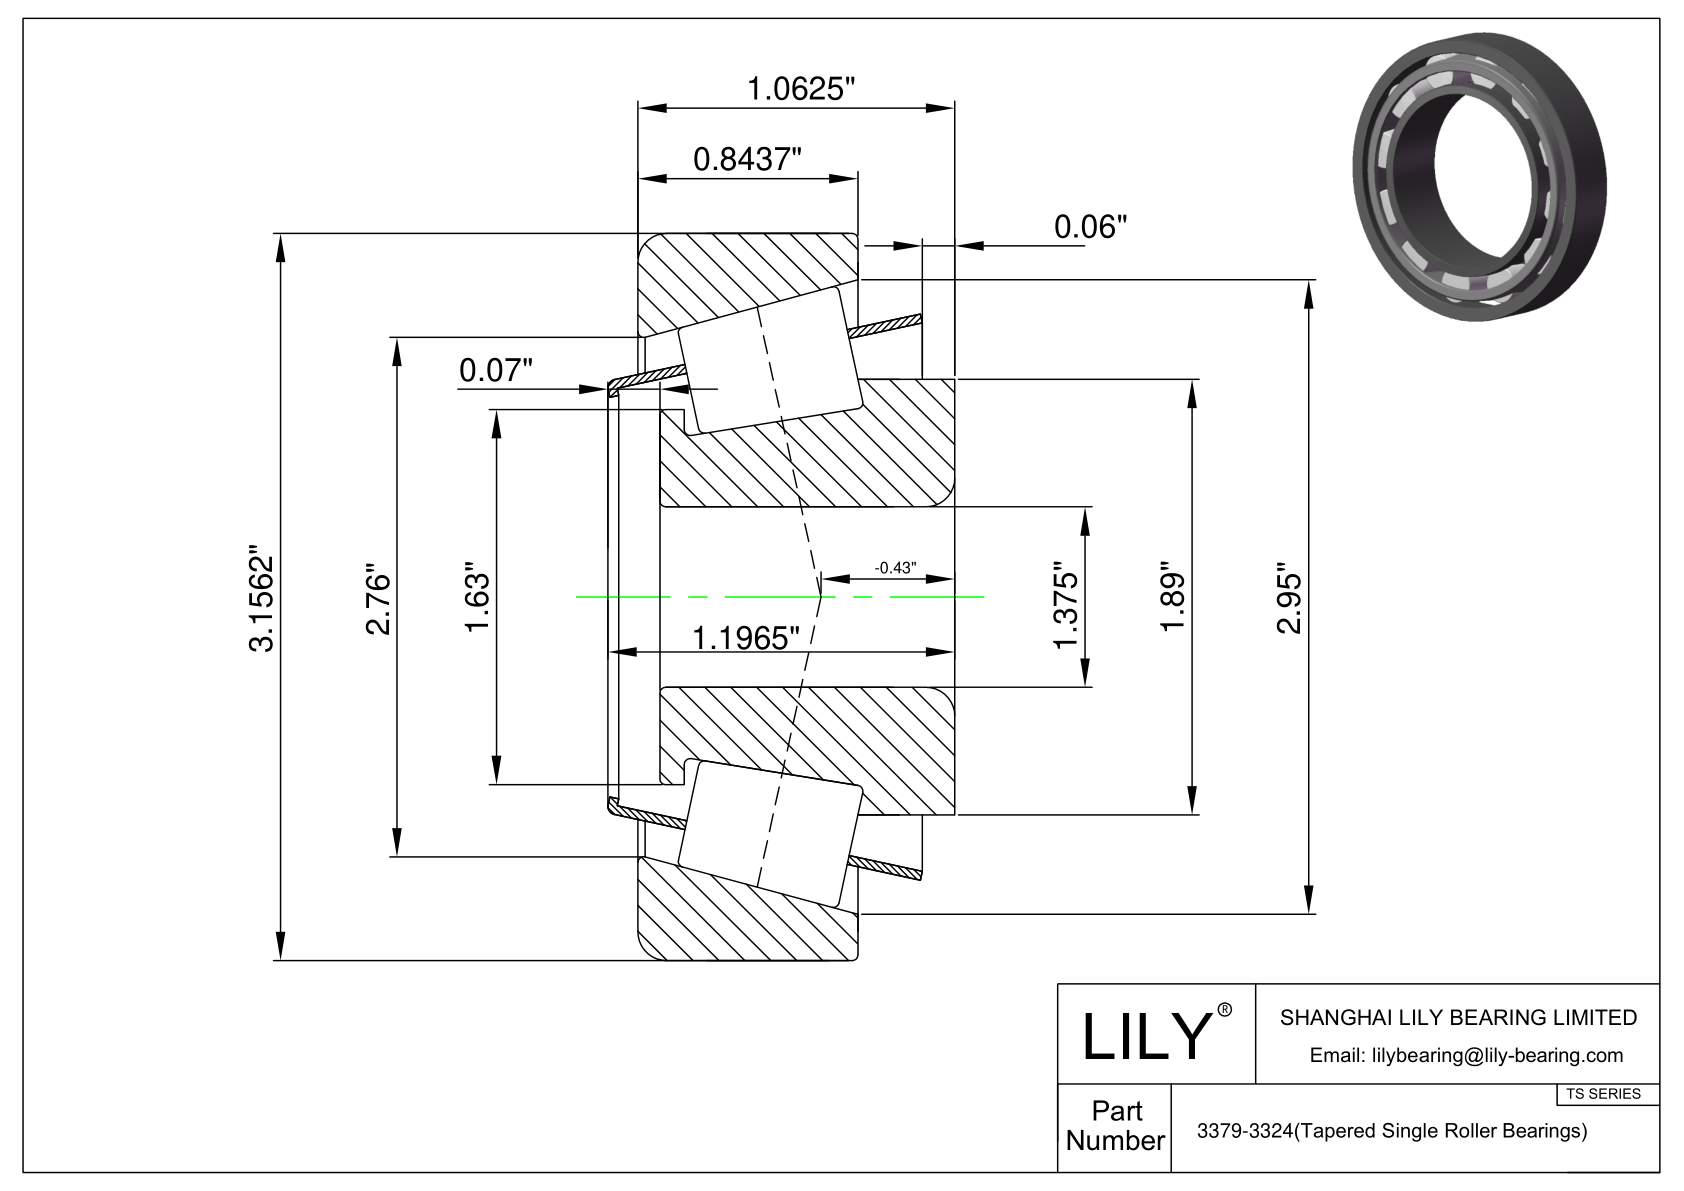 3379-3324 TS (Tapered Single Roller Bearings) (Imperial) cad drawing